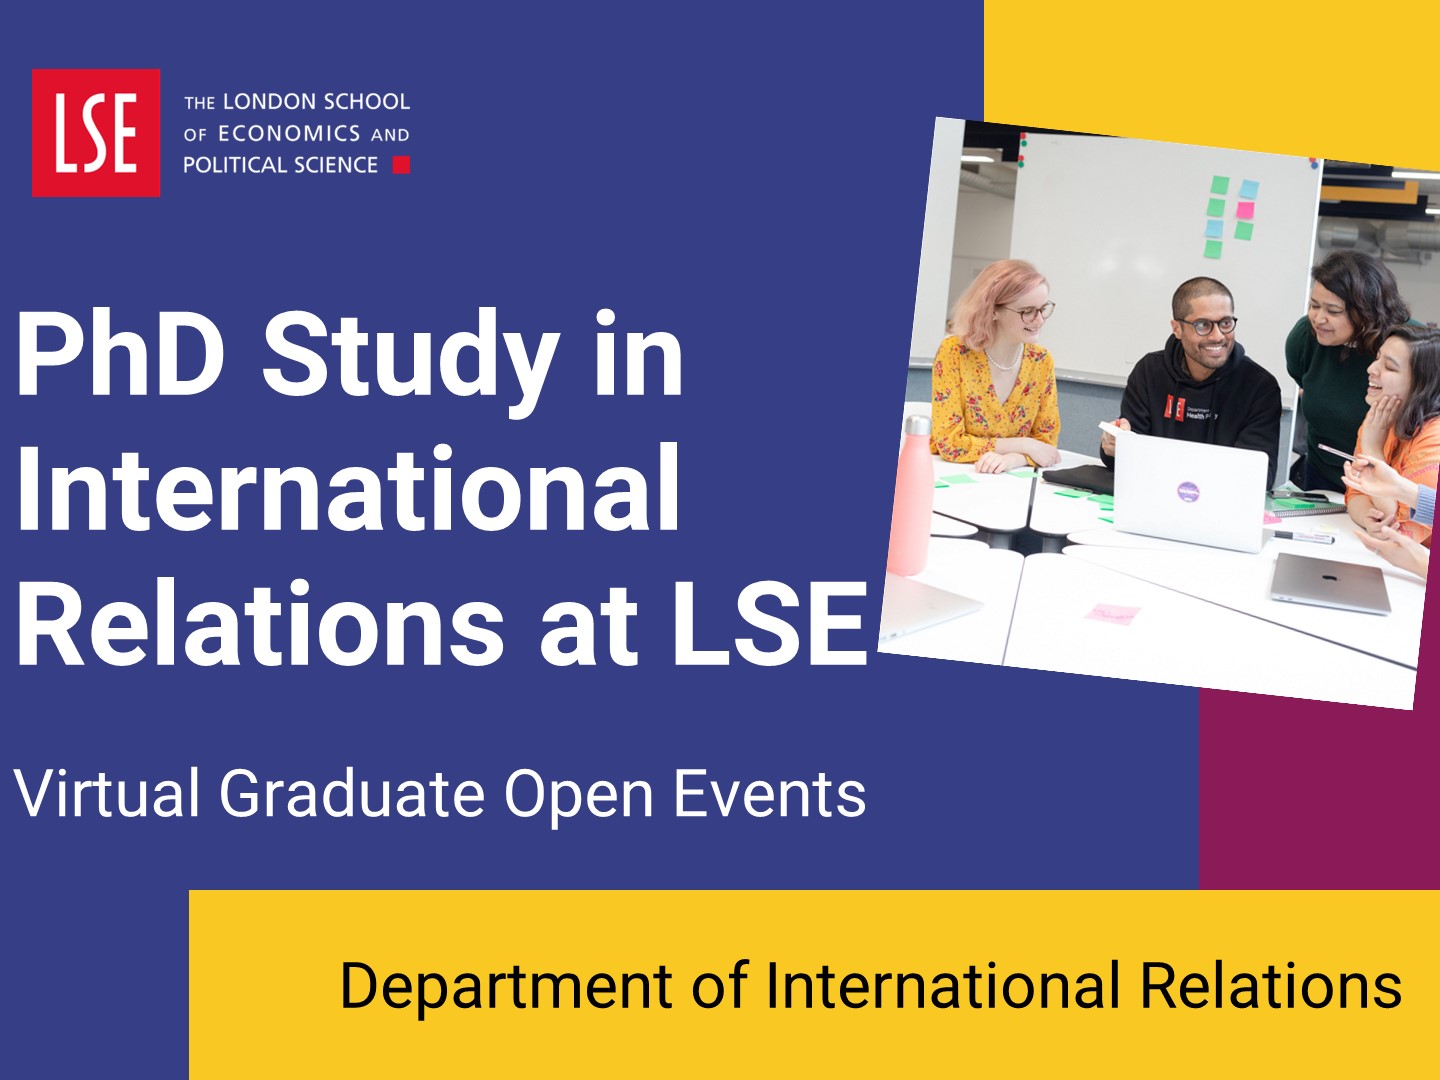 Introduction to PhD study in International Relations at LSE